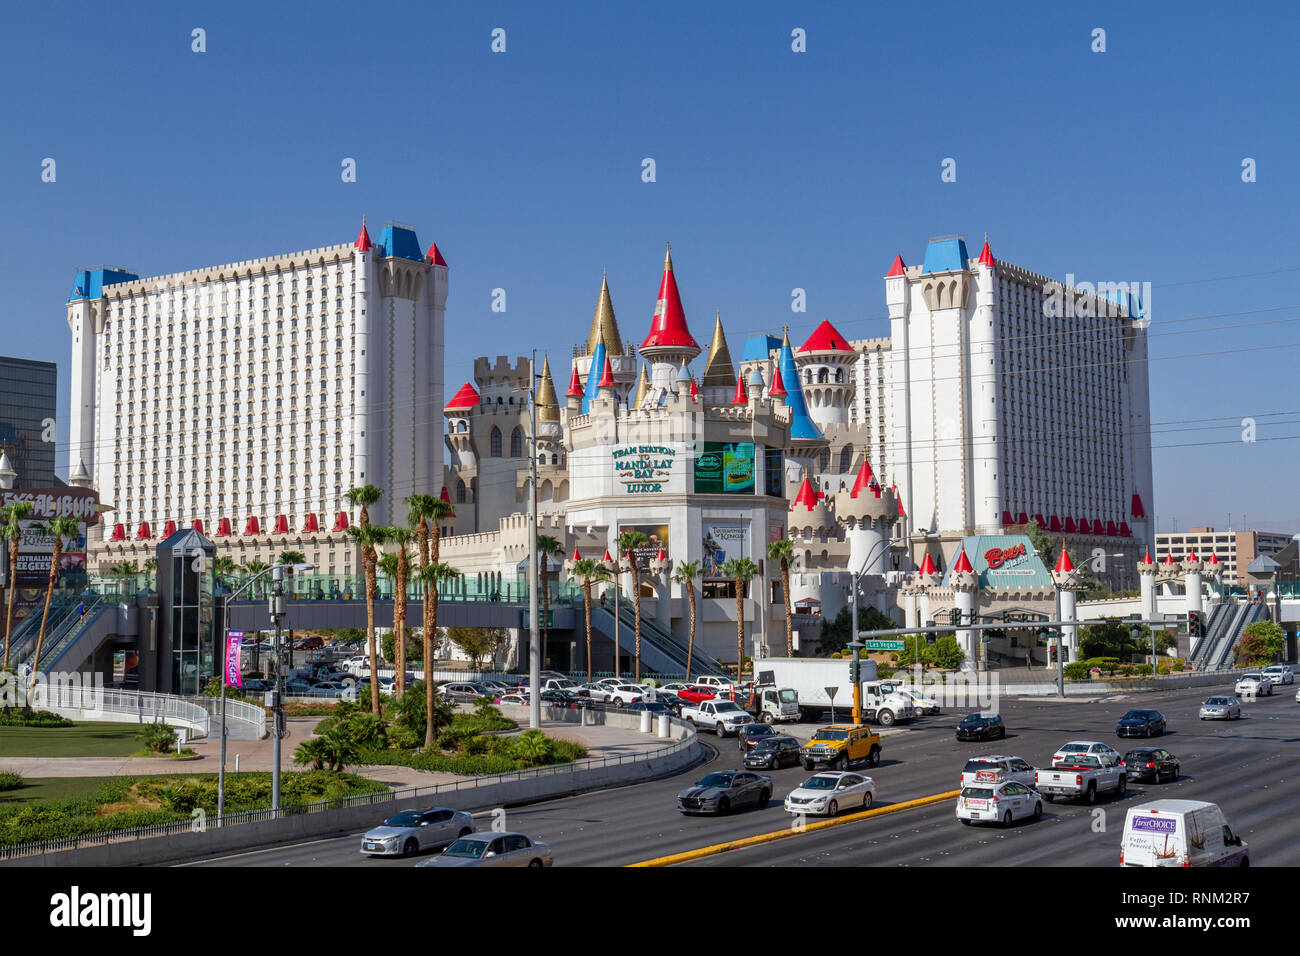 The Excalibur Hotel & Casino on The Strip in Las Vegas, Nevada, United States. Stock Photo